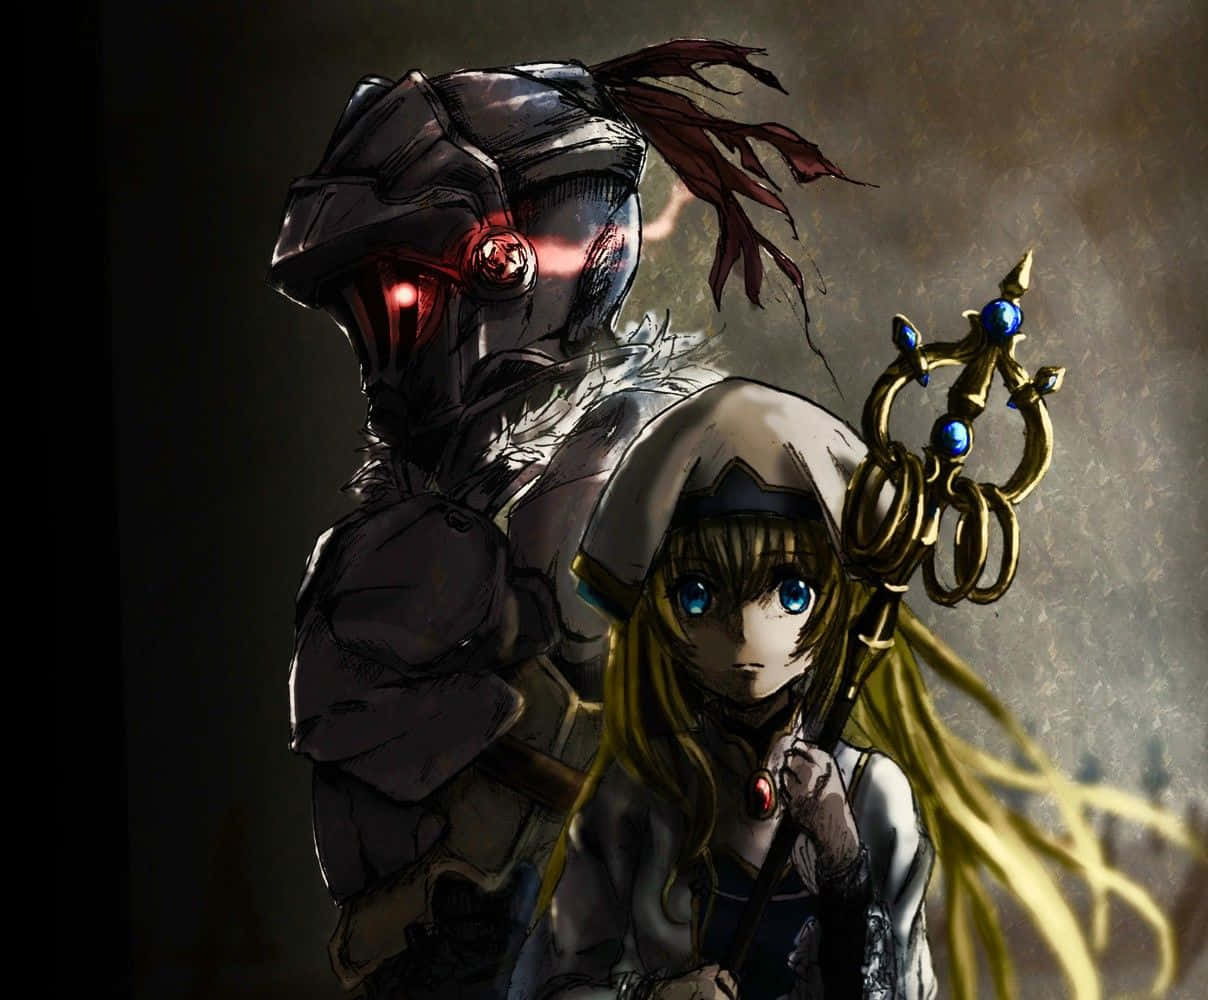 Download Goblin Slayer is ready to face any challenge